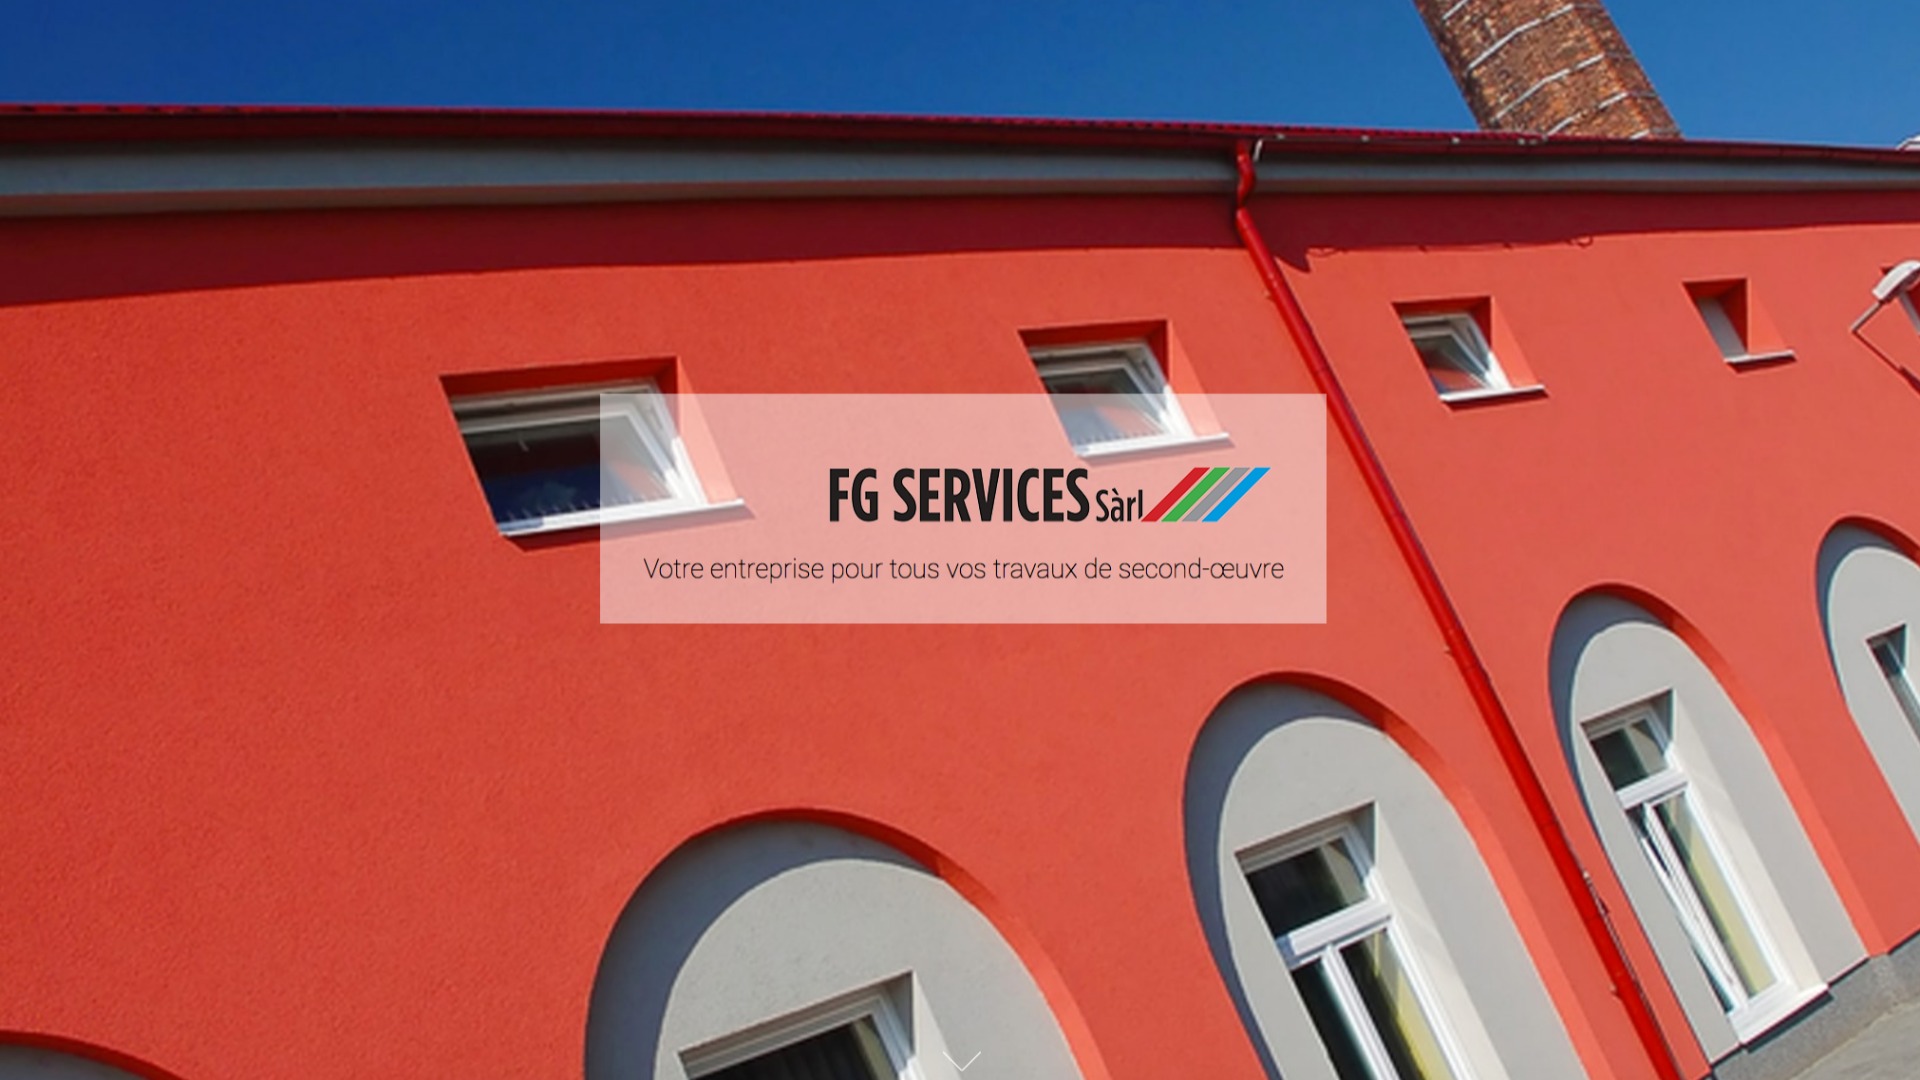 (c) Fgservices.ch